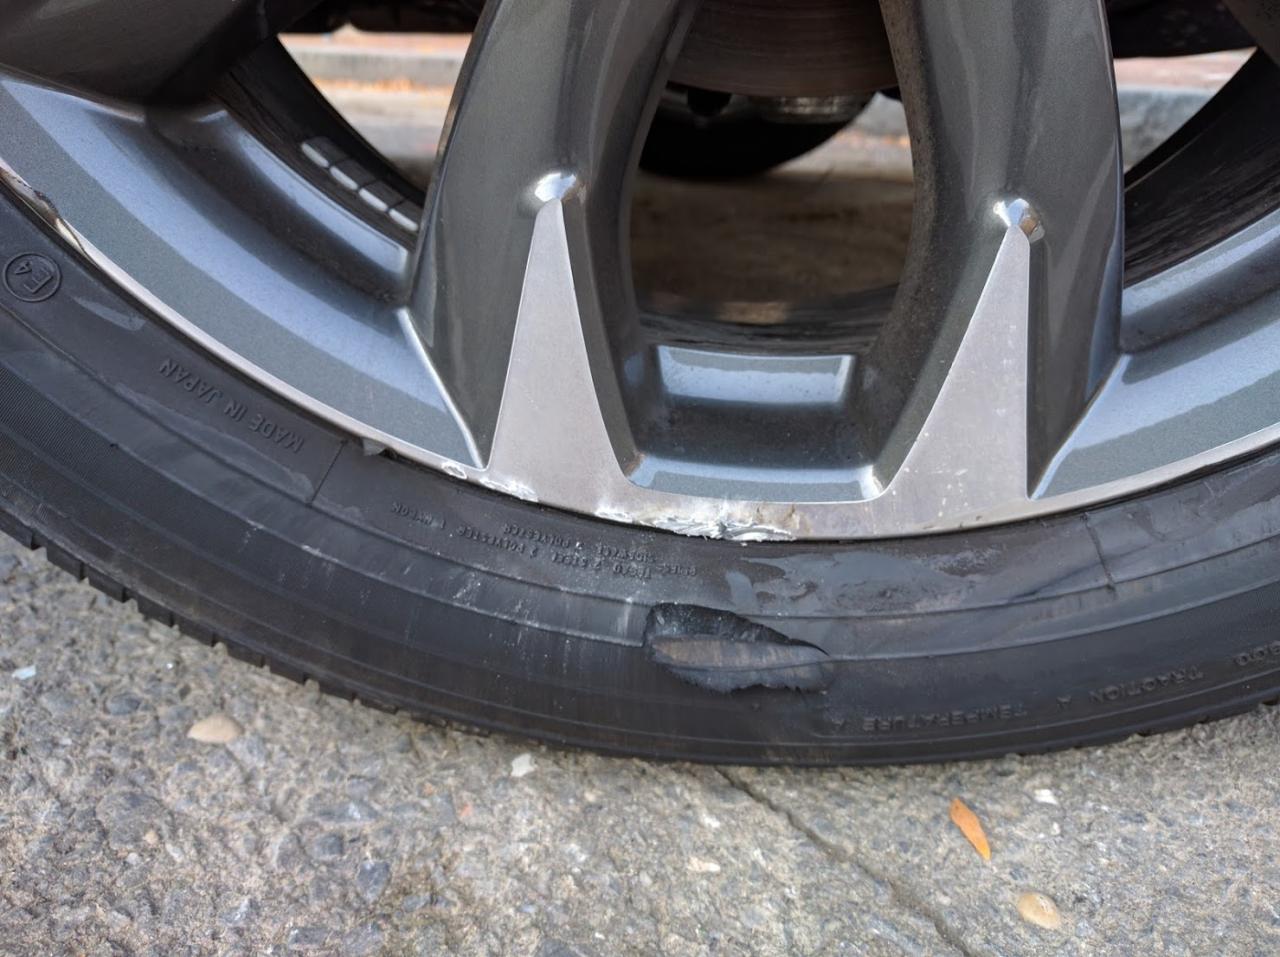 Assessing Tire Damage